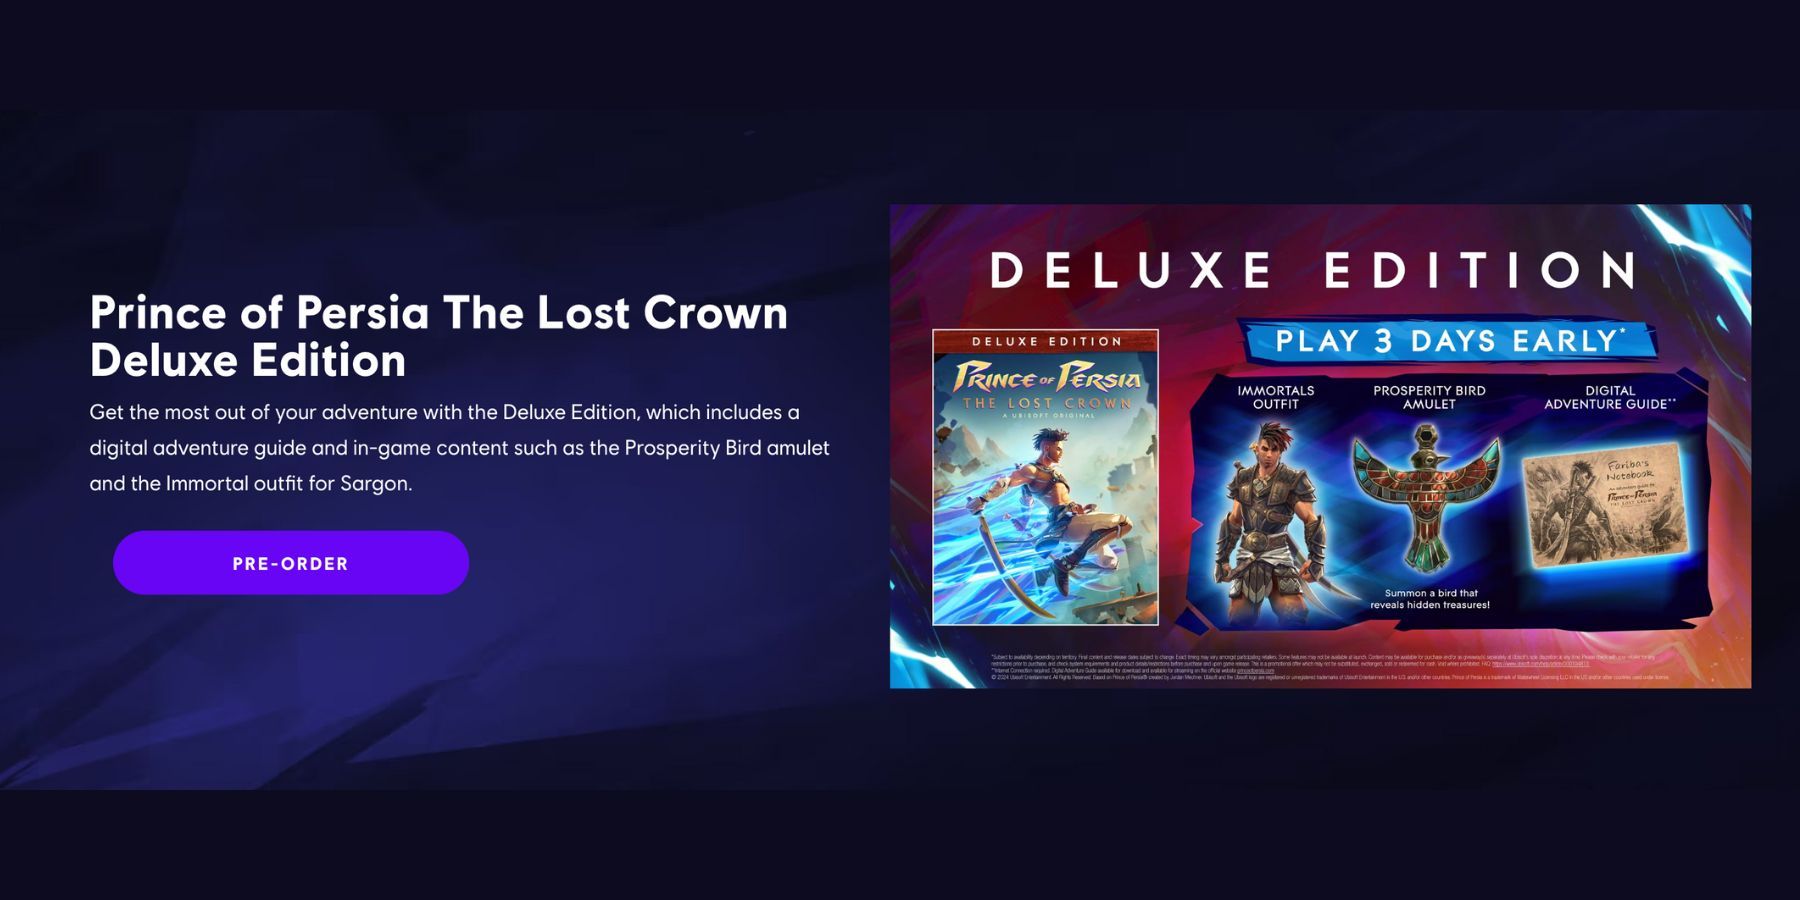 prince of persia the lost crown deluxe edition bonuses.